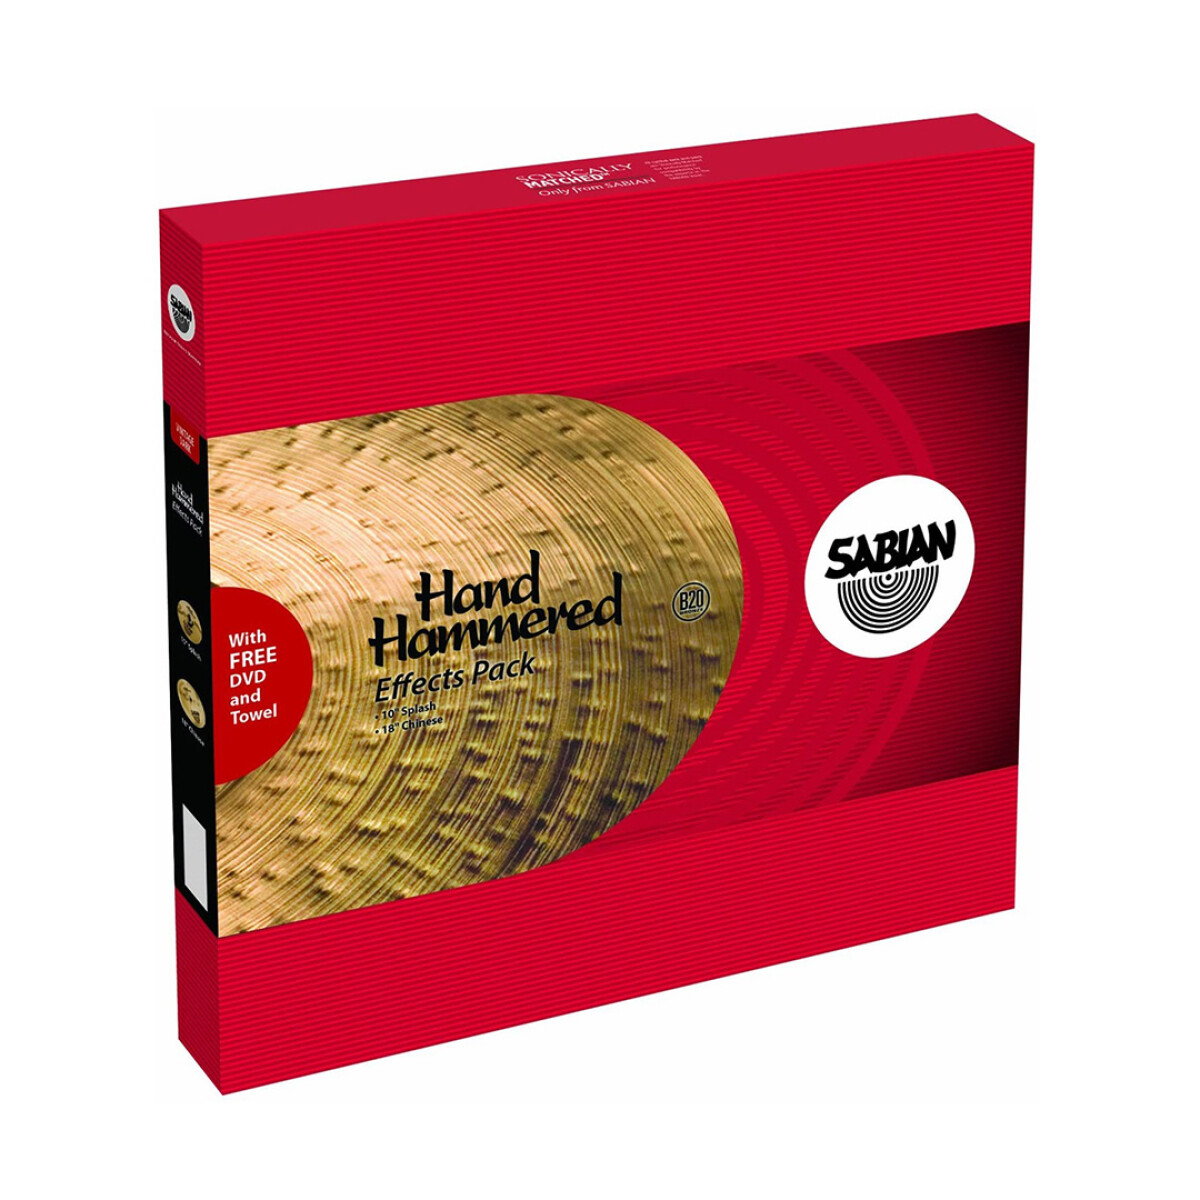 Platillo Pack Sabian Hh 10sp 18ch Effects 